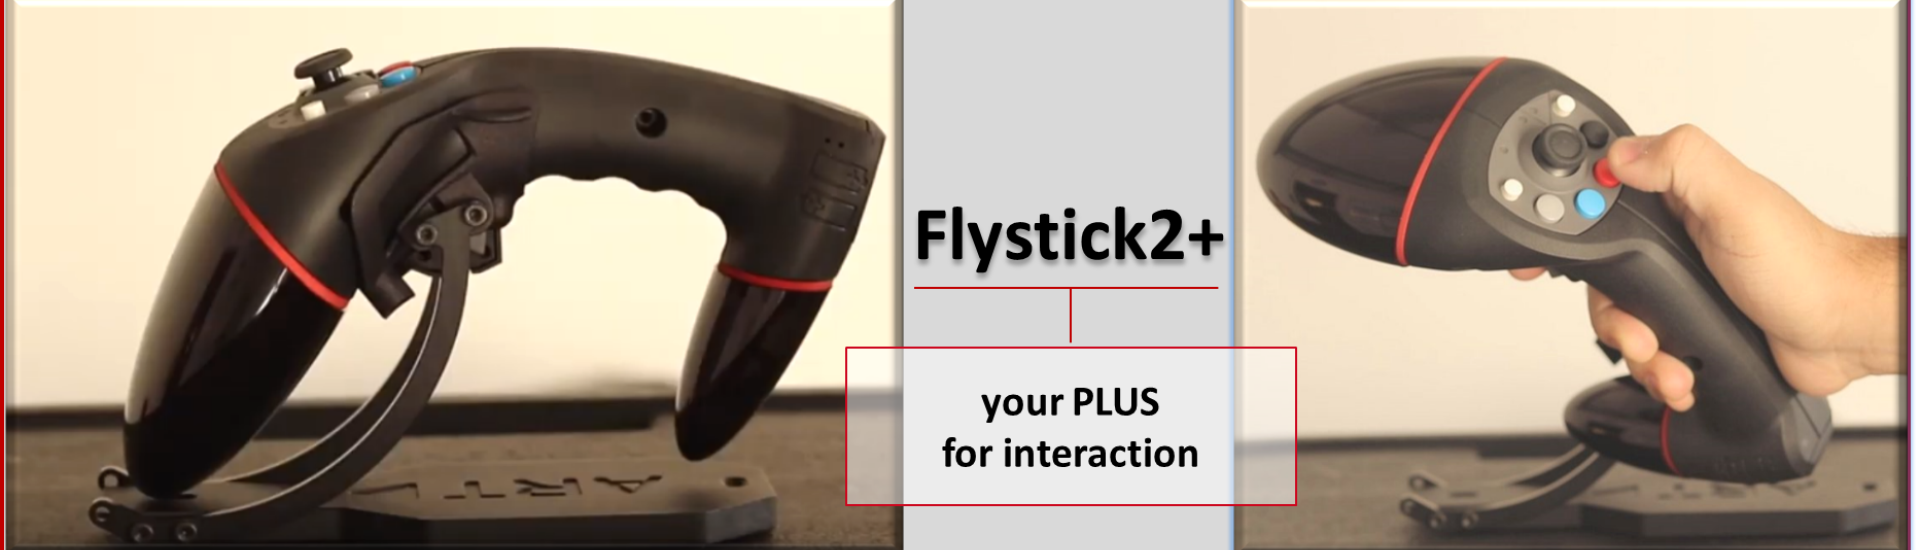 New Flystick2+: even more features for high-quality interaction